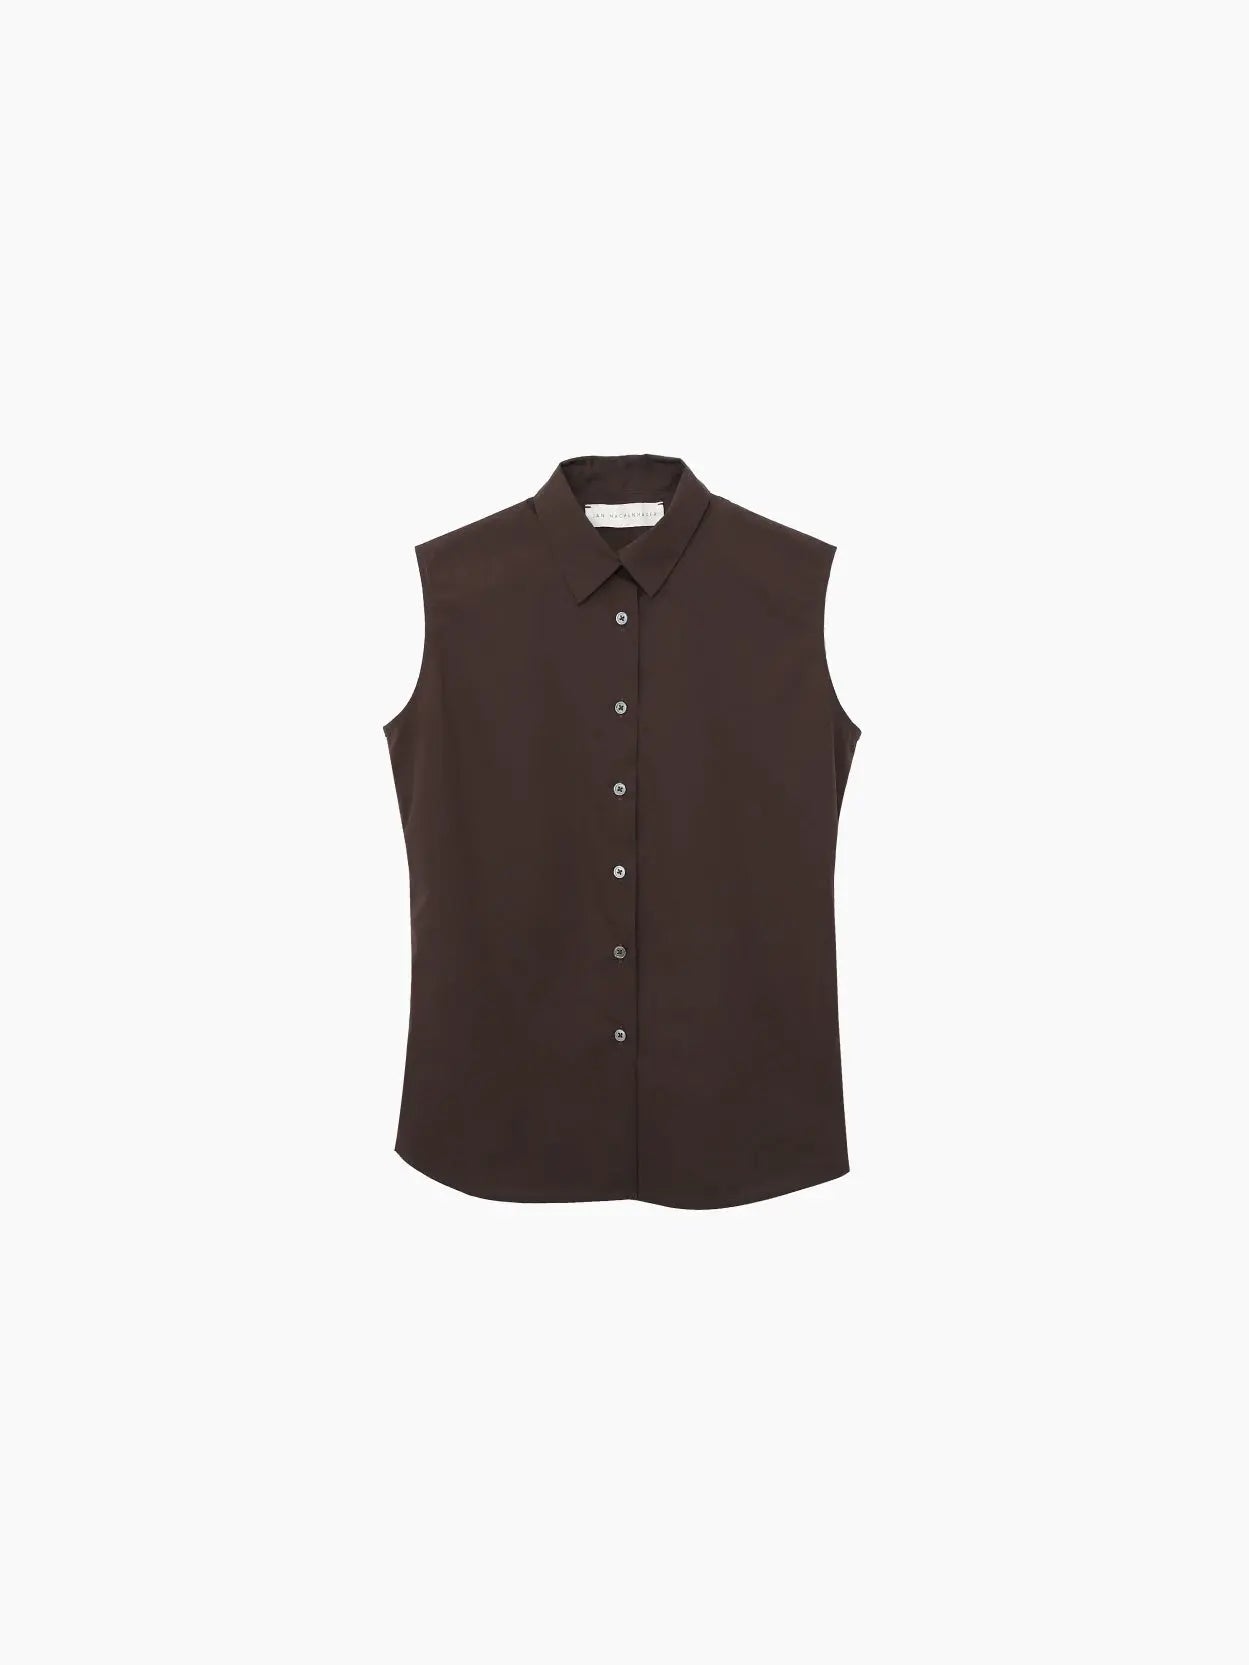 A sleeveless, dark brown collared Onyx Shirt Espresso from Jan Machenhauer with front button closure. The shirt features a slightly tailored fit and a simple, minimalist design, capturing the chic essence of Barcelona. It is set against a white background.